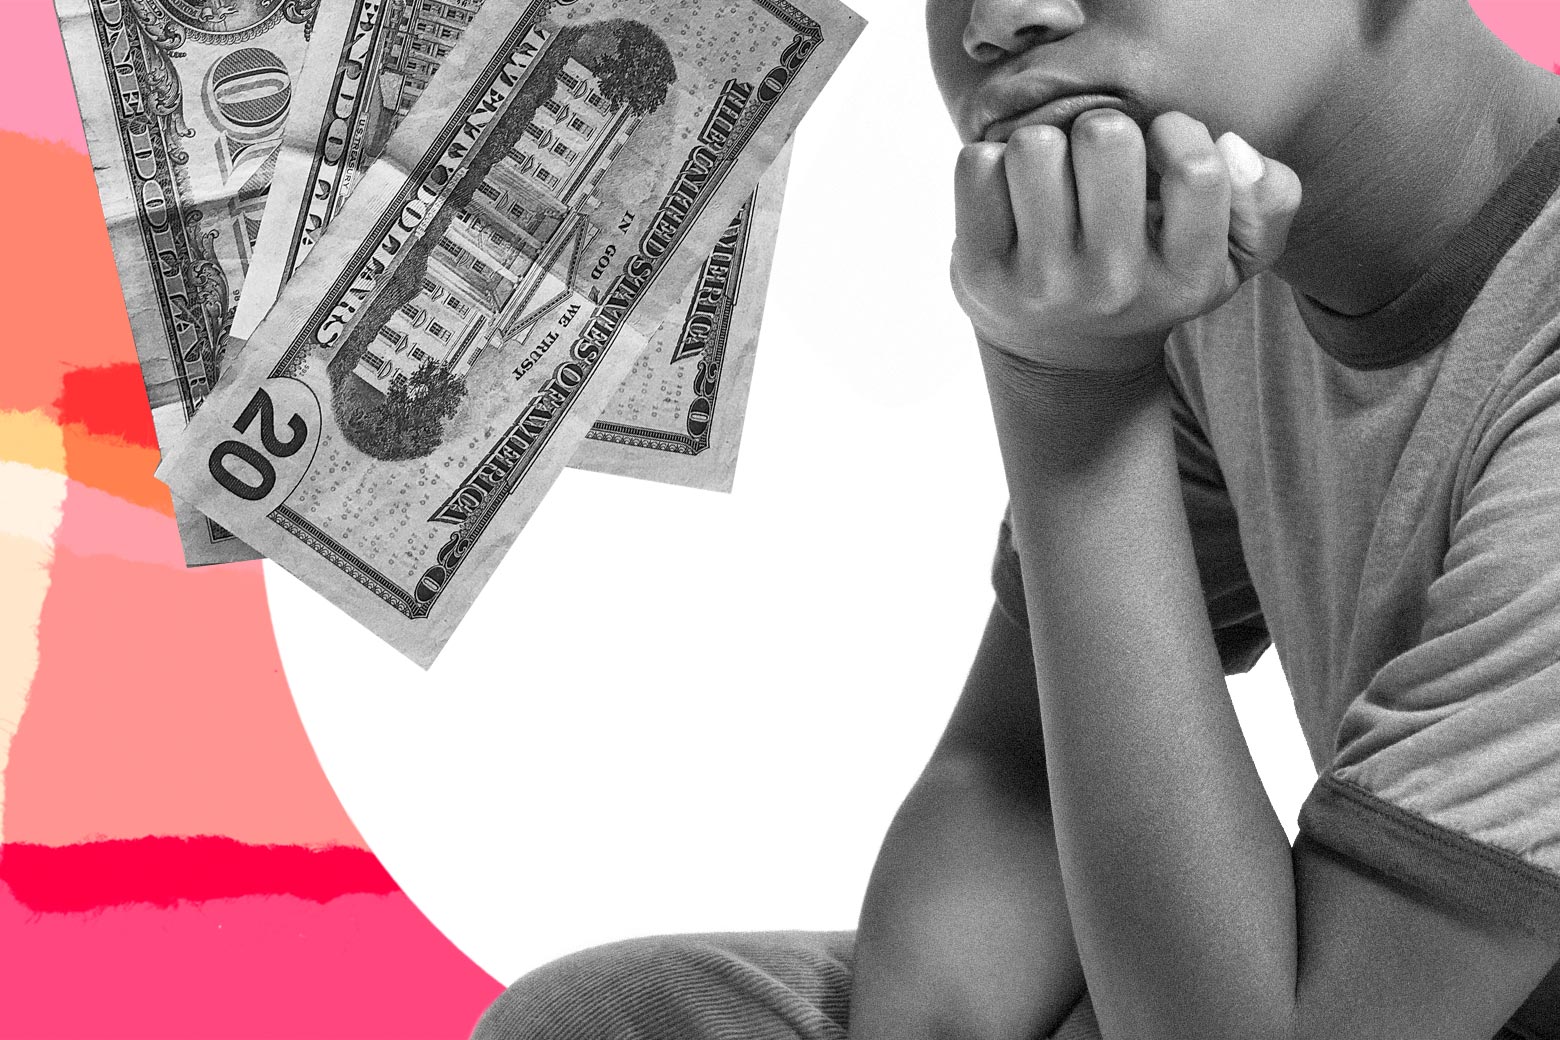 Black male teenager in a t-shirt resting his head on his hand next to a pile of money.